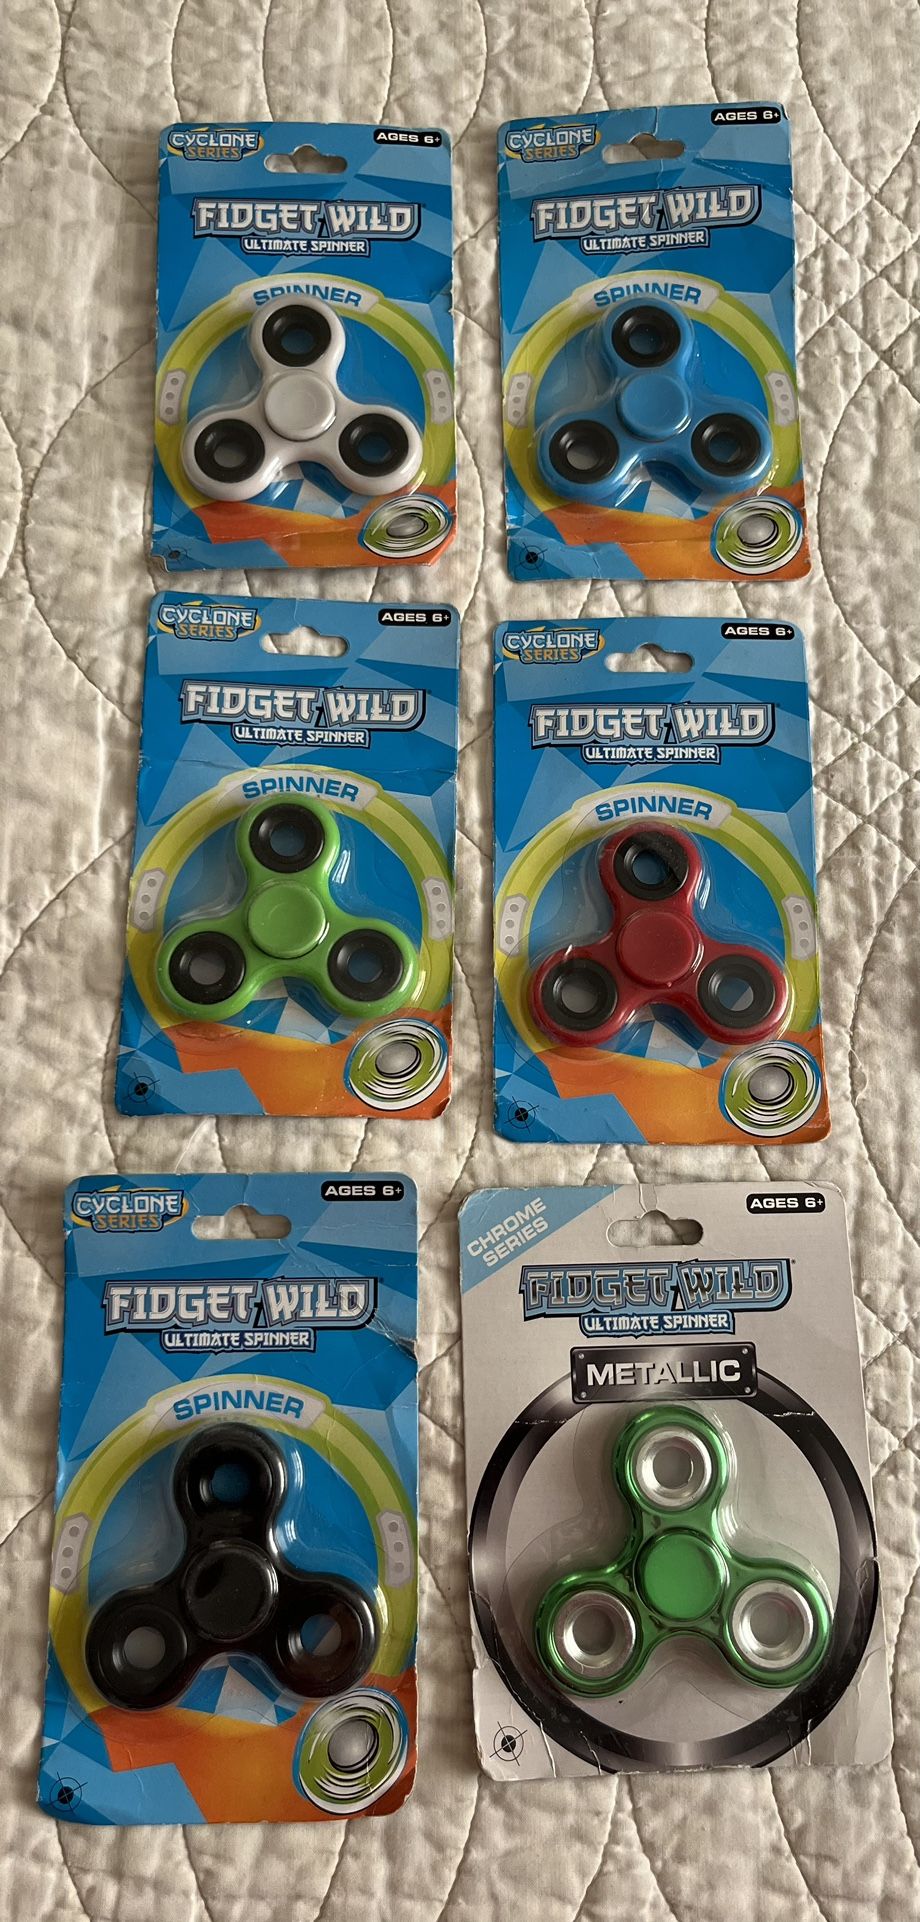 Fidget Wild Ultimate Spinners Lot of 6 Cyclone Metallic Chrome Series Unopened